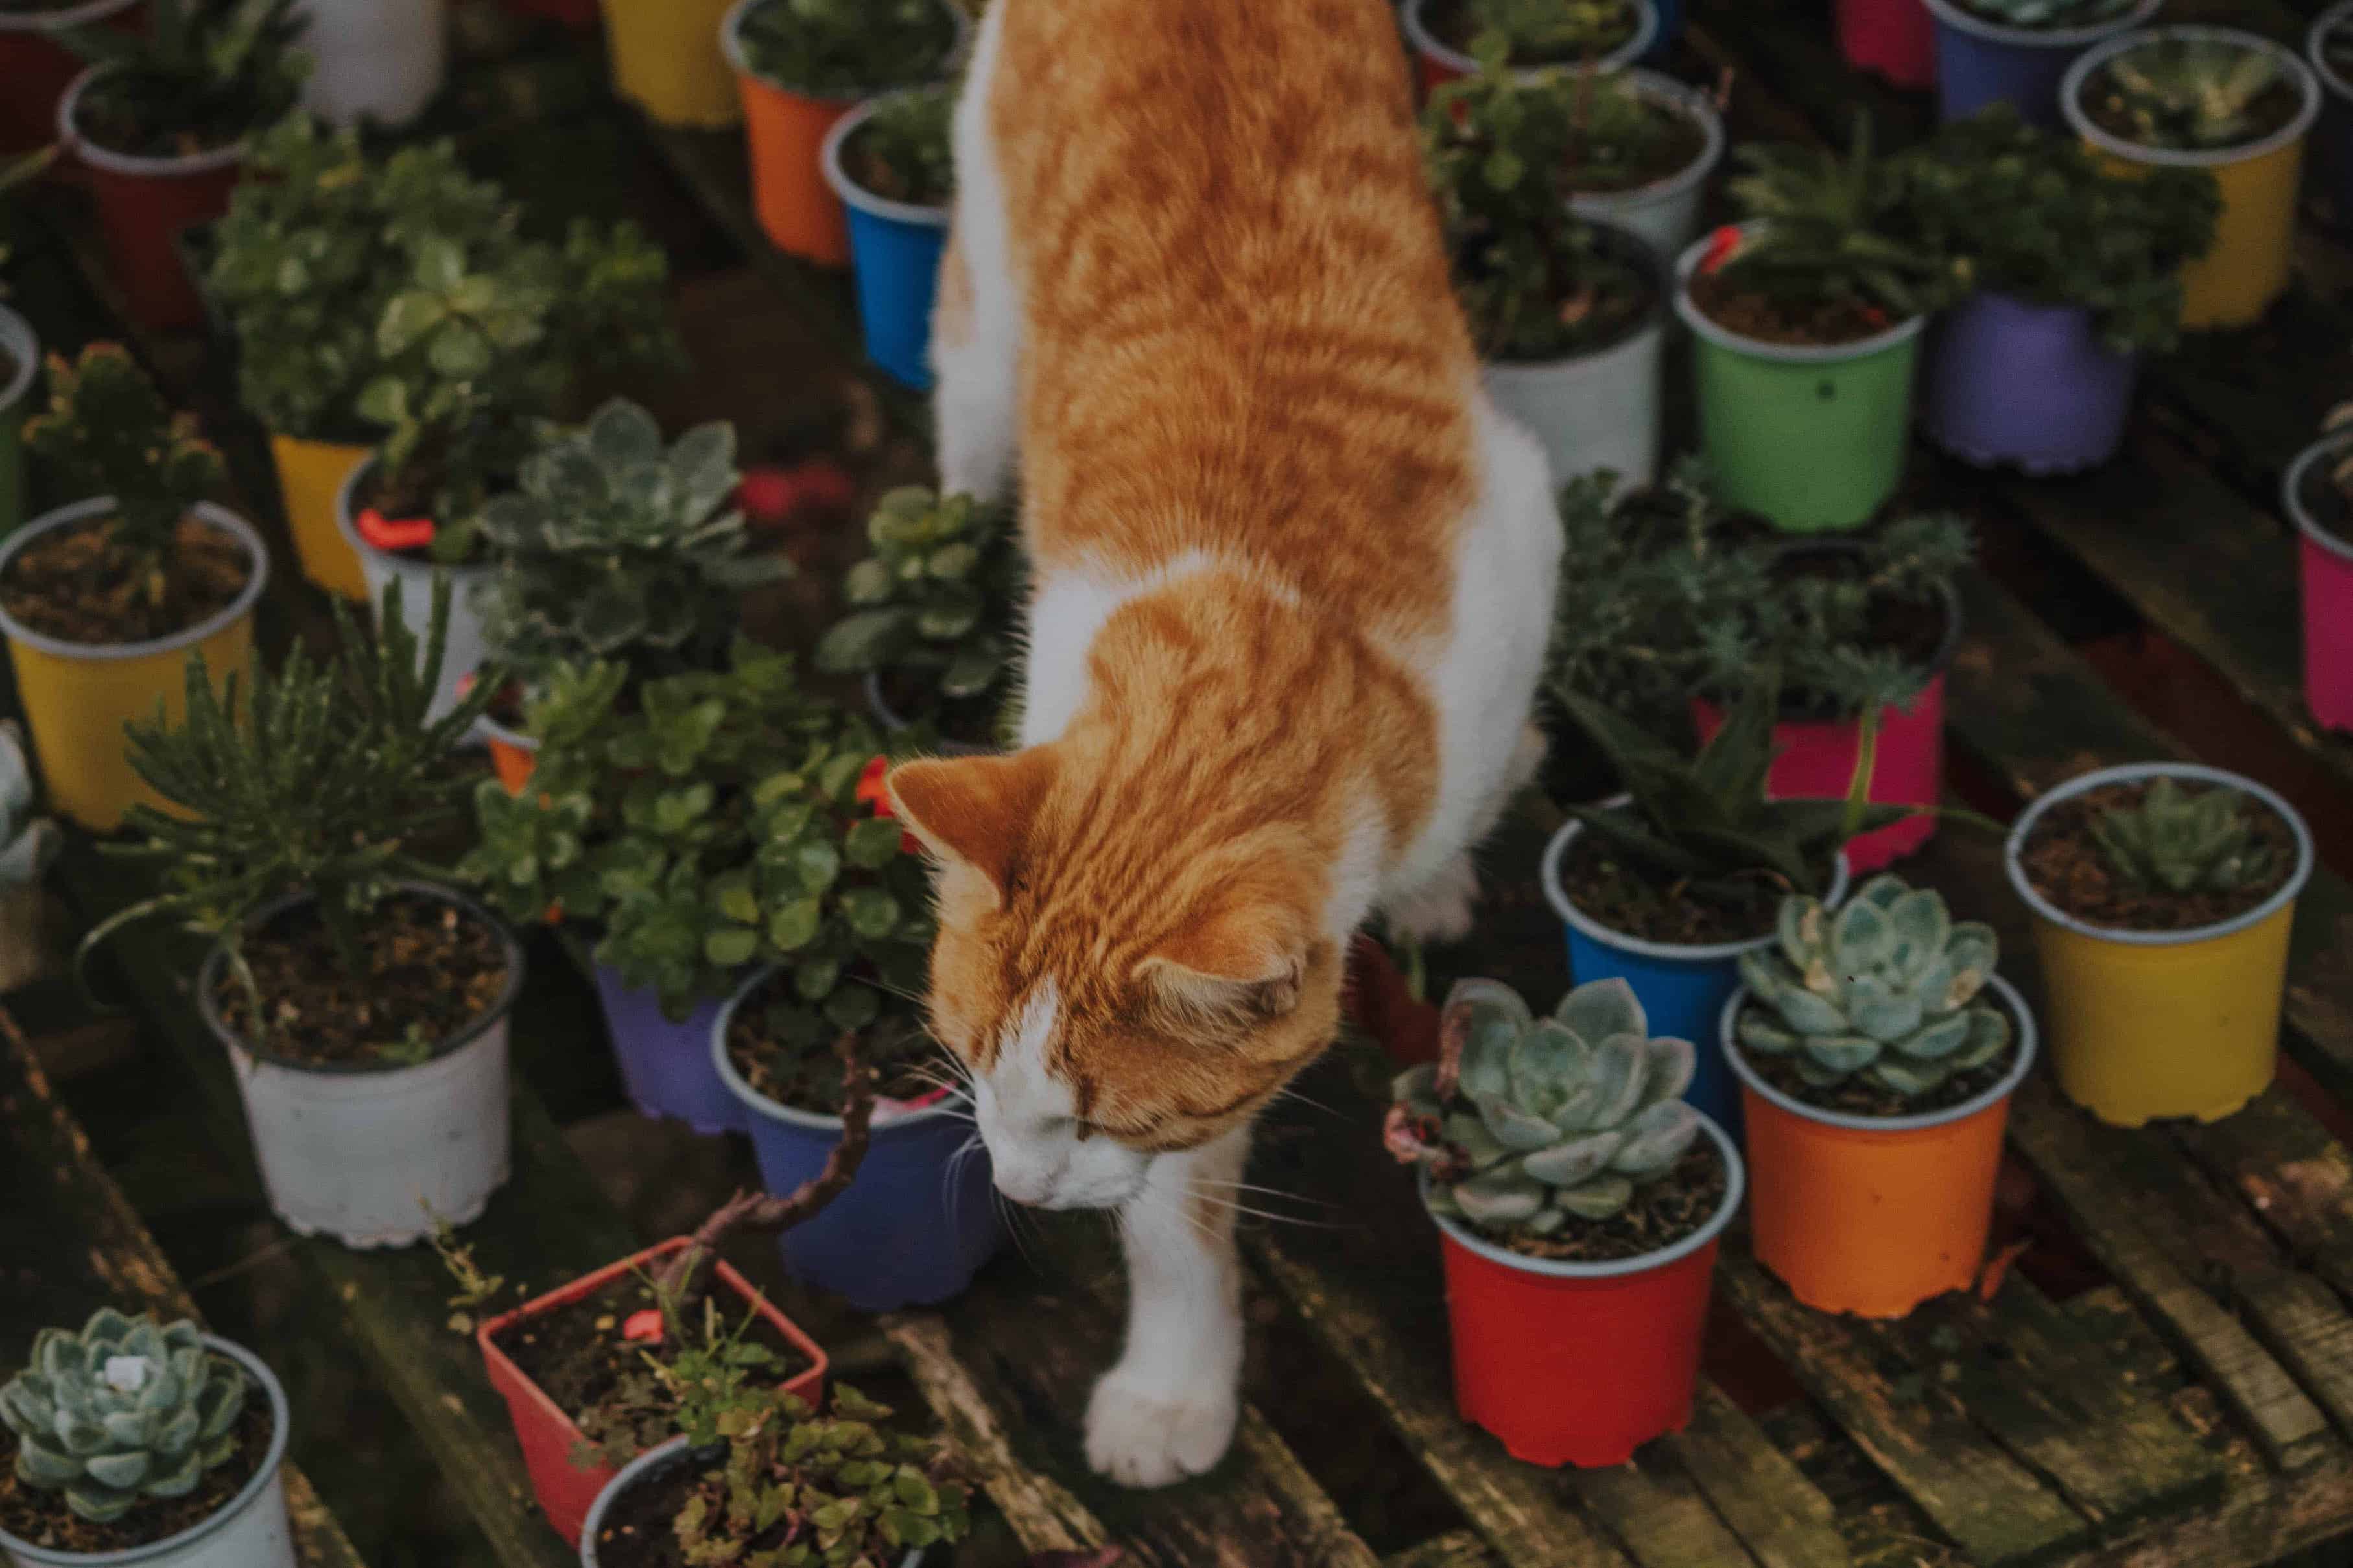 17 Houseplants That Are Safe for Cats